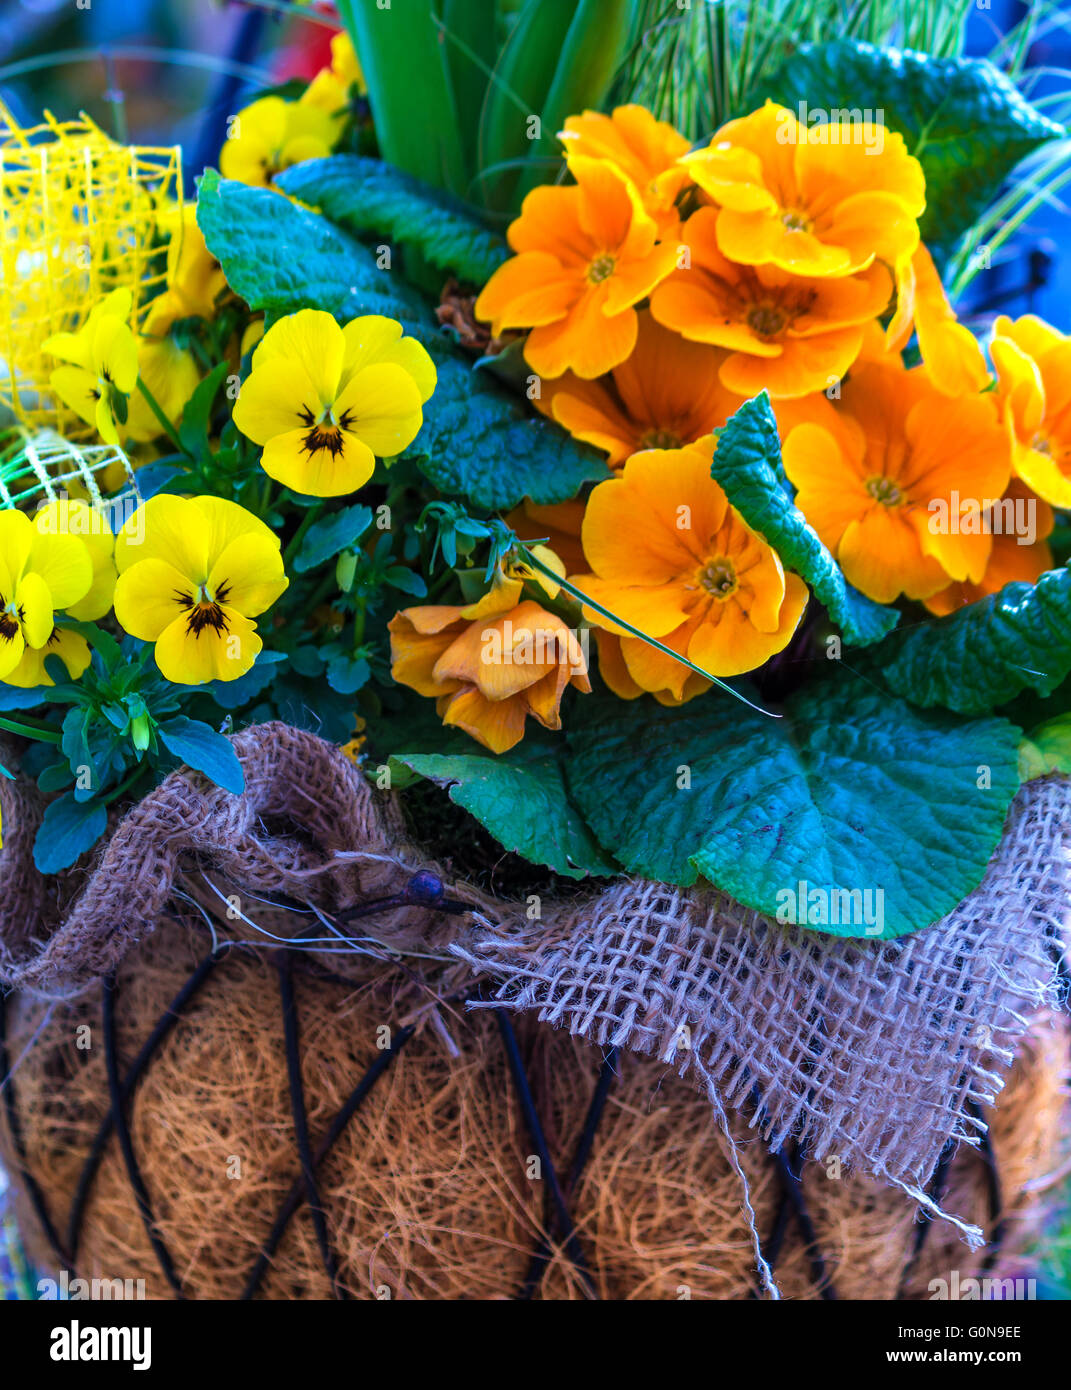 Yellow and orange spring flowers in a hanging basket Stock Photo